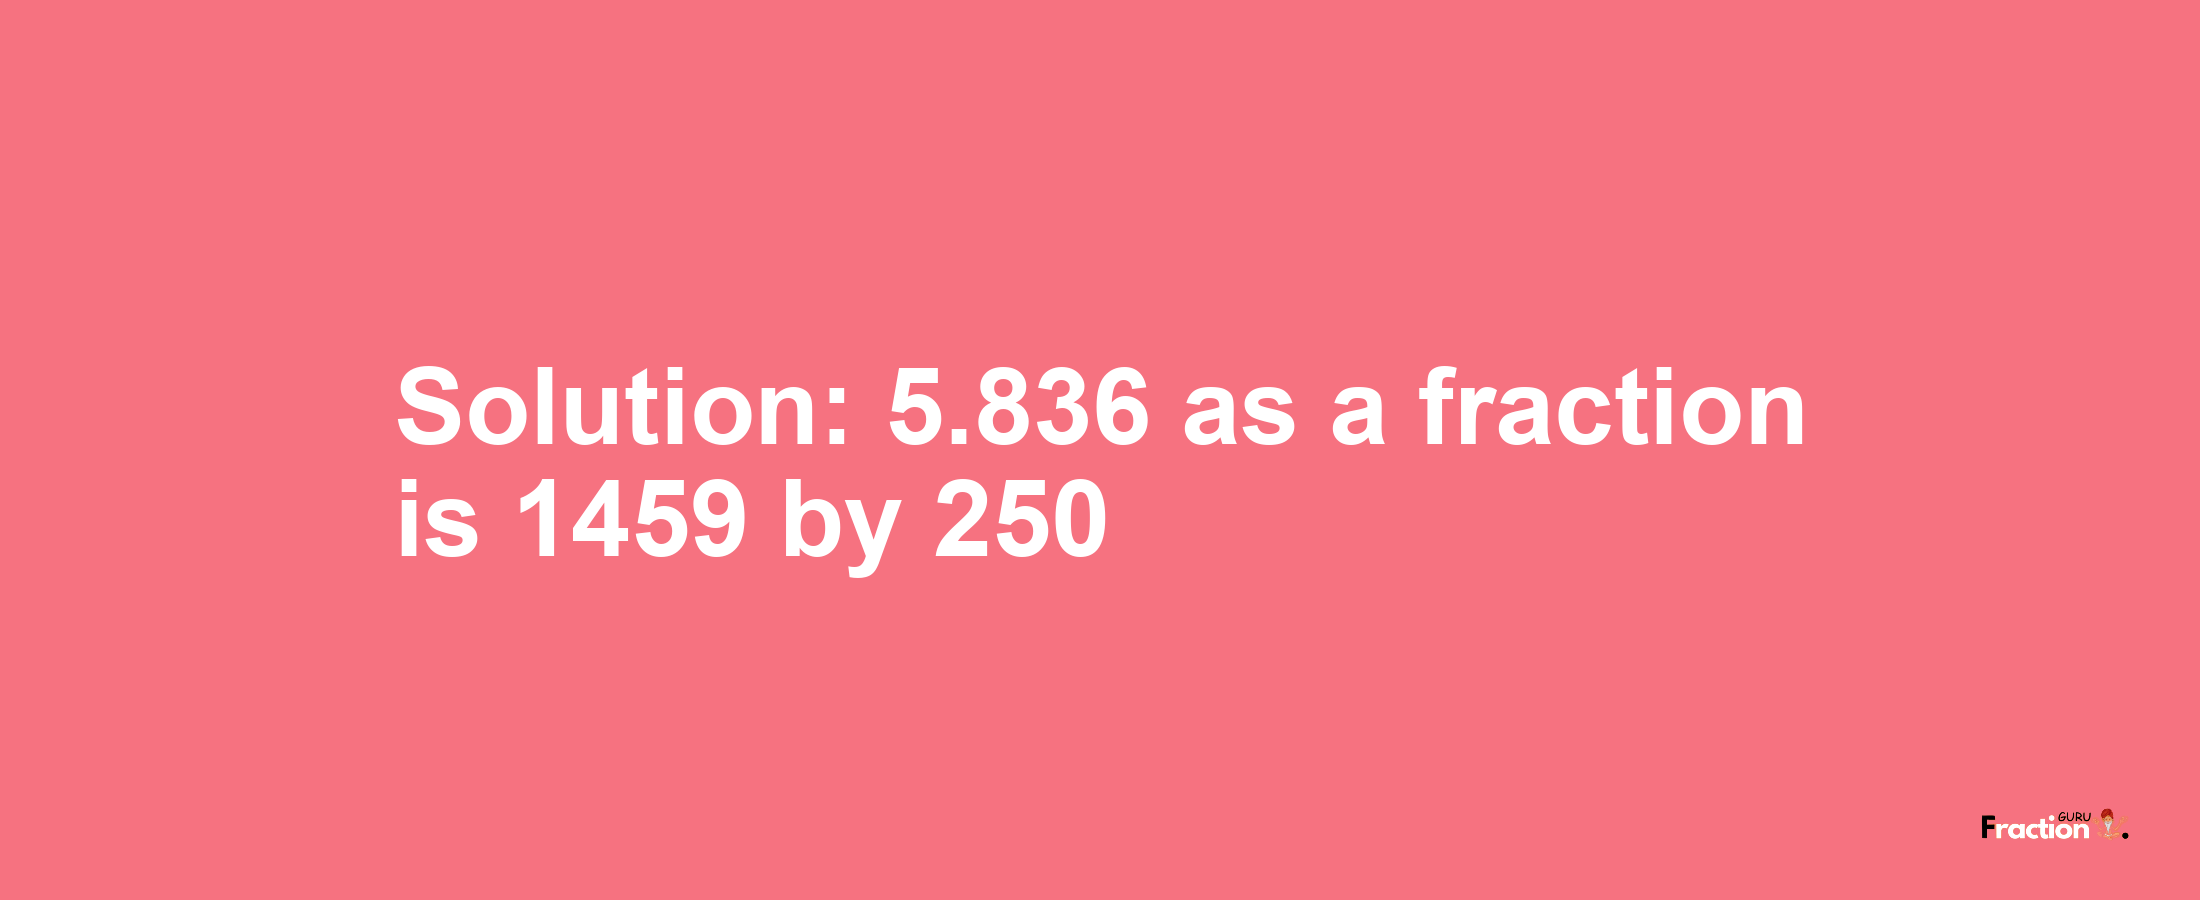 Solution:5.836 as a fraction is 1459/250